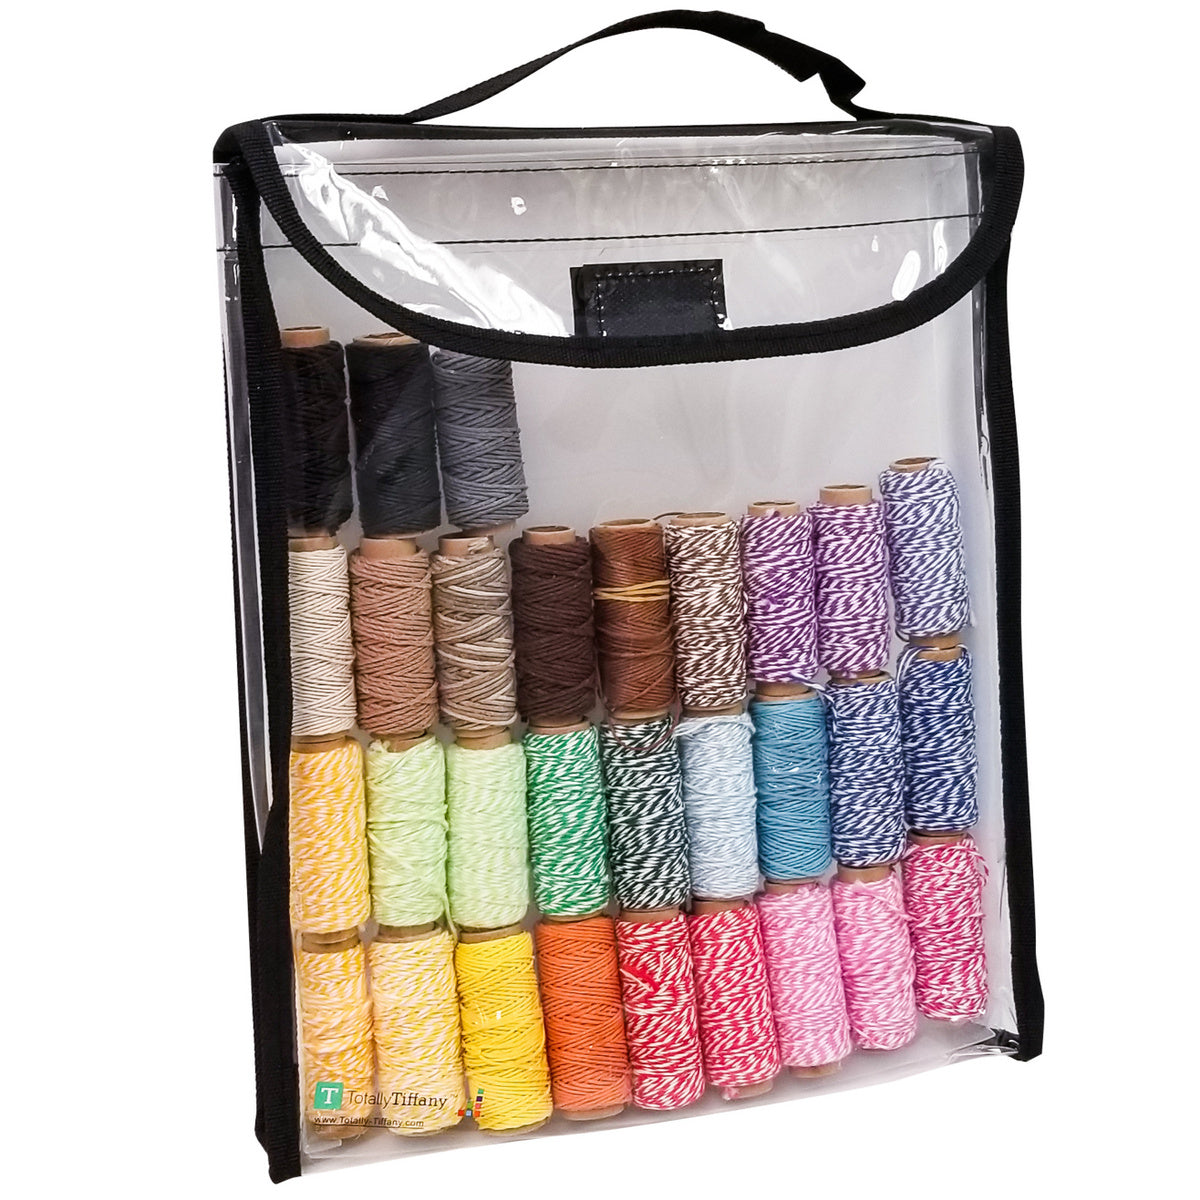 Organize Baker's Twine and store it in a Totally-Tiffany EZ2Organize bag.